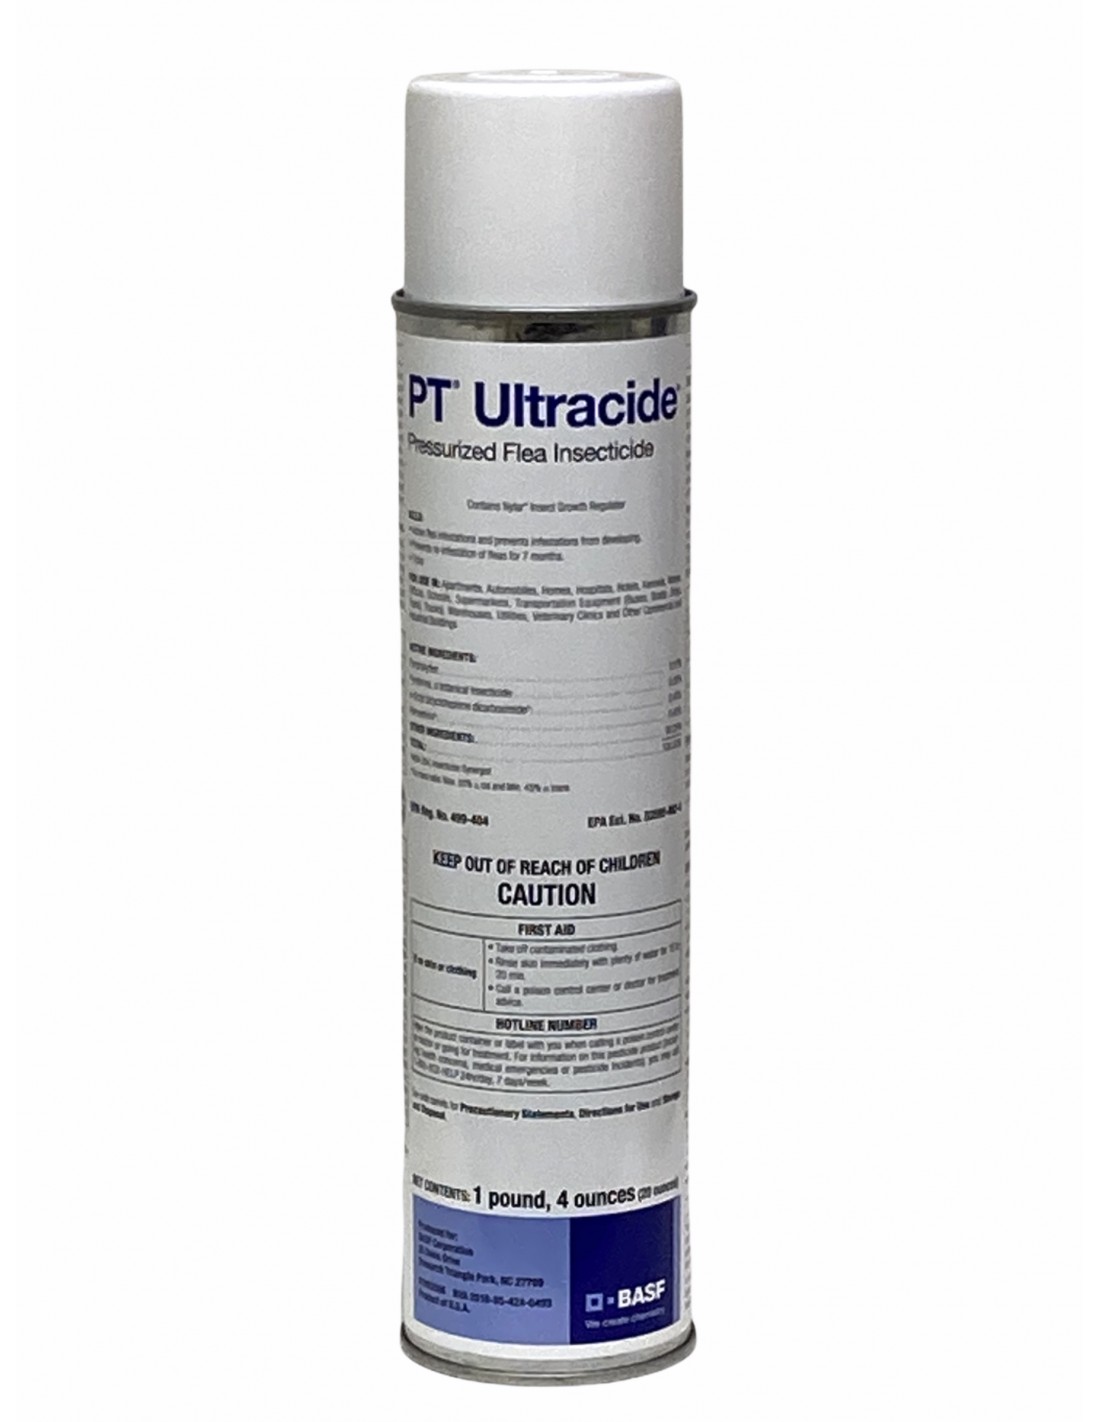 Whitmire Ultracide for how long works? Is toxic for cats?